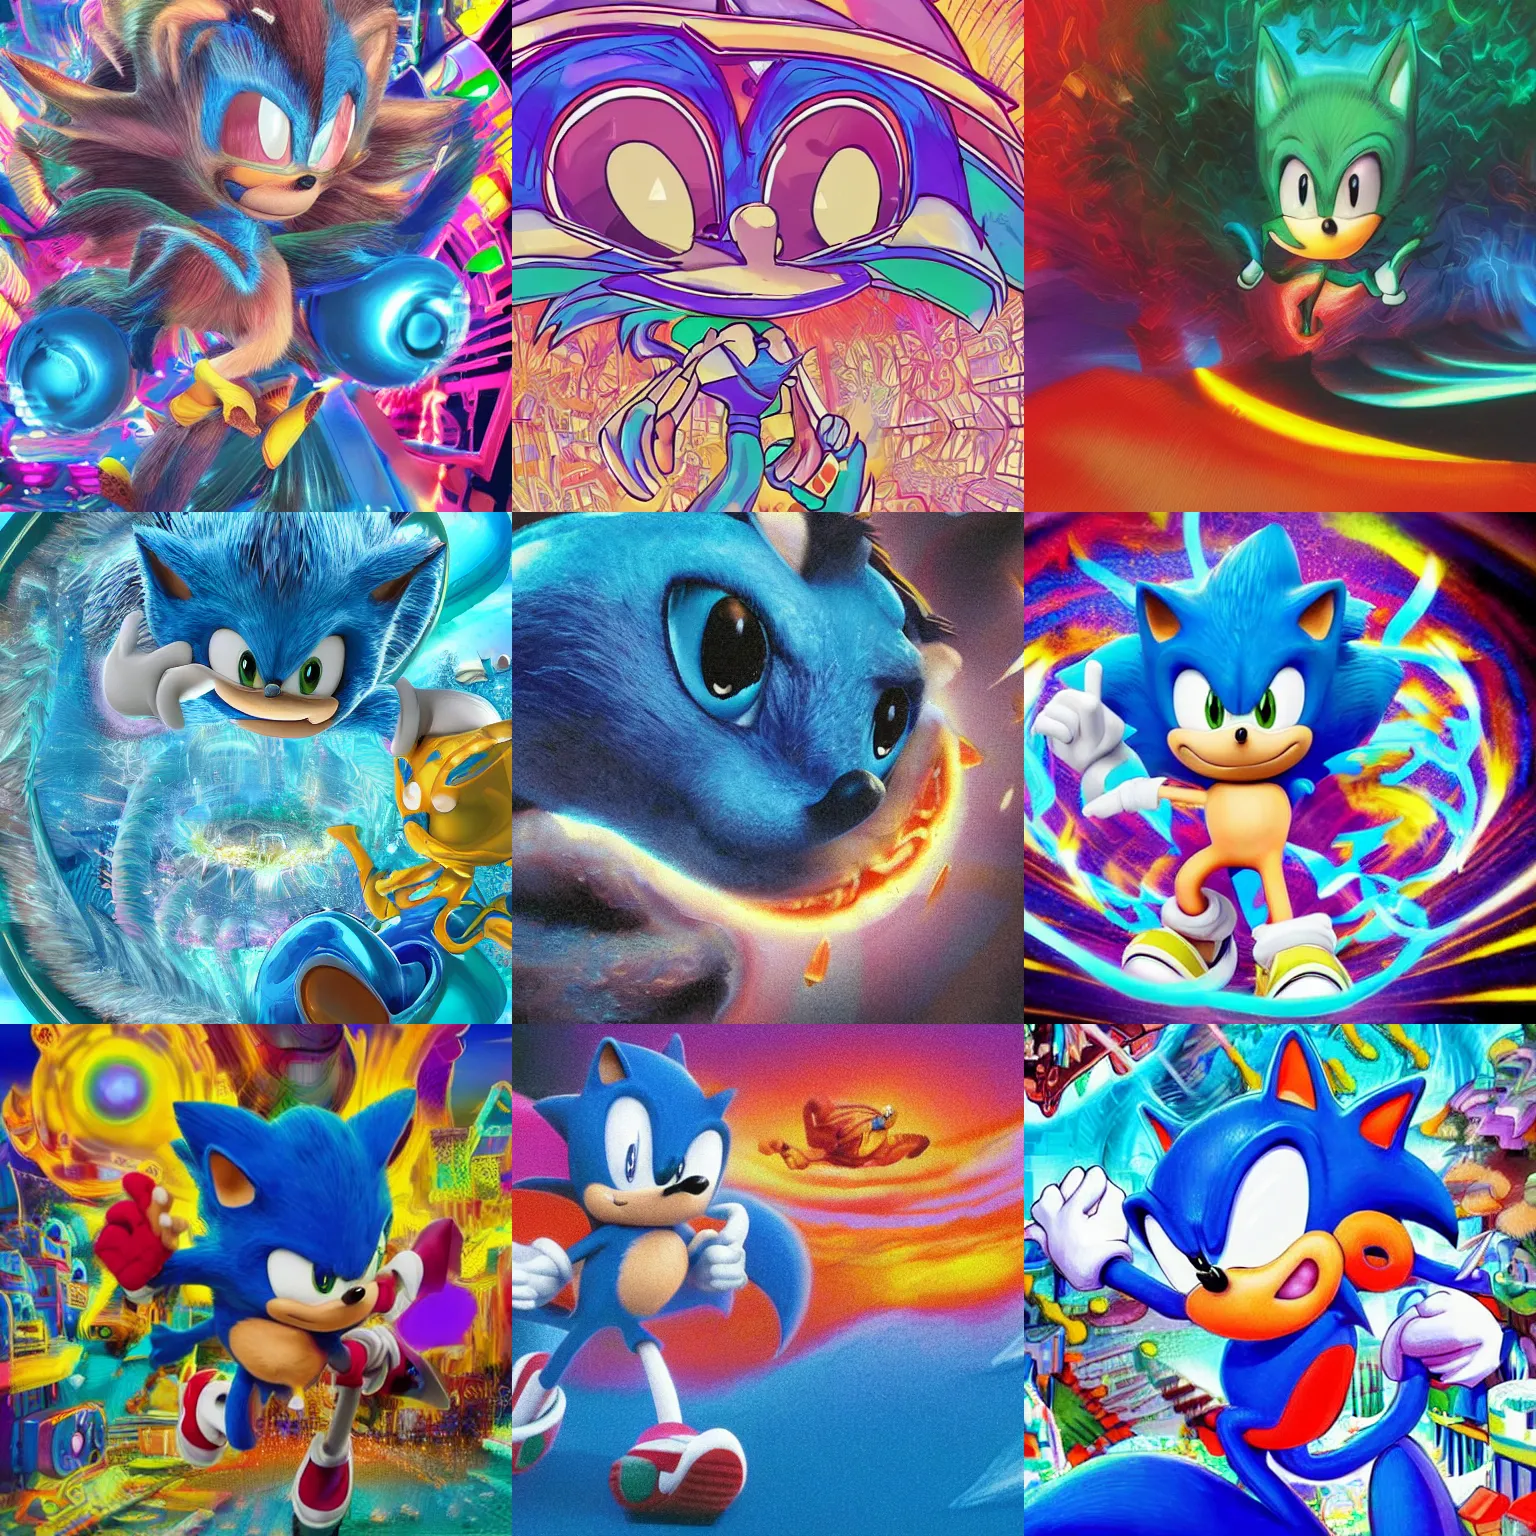 Prompt: close up sonic the hedgehog in a surreal, soft, neon, glossy, professional, high quality airbrush art mgmt shpongle album cover of a chrome dissolving LSD DMT blue sonic the hedgehog surfing through vaporwave caves, checkerboard horizon , 1980s 1982 Sega Genesis video game album cover